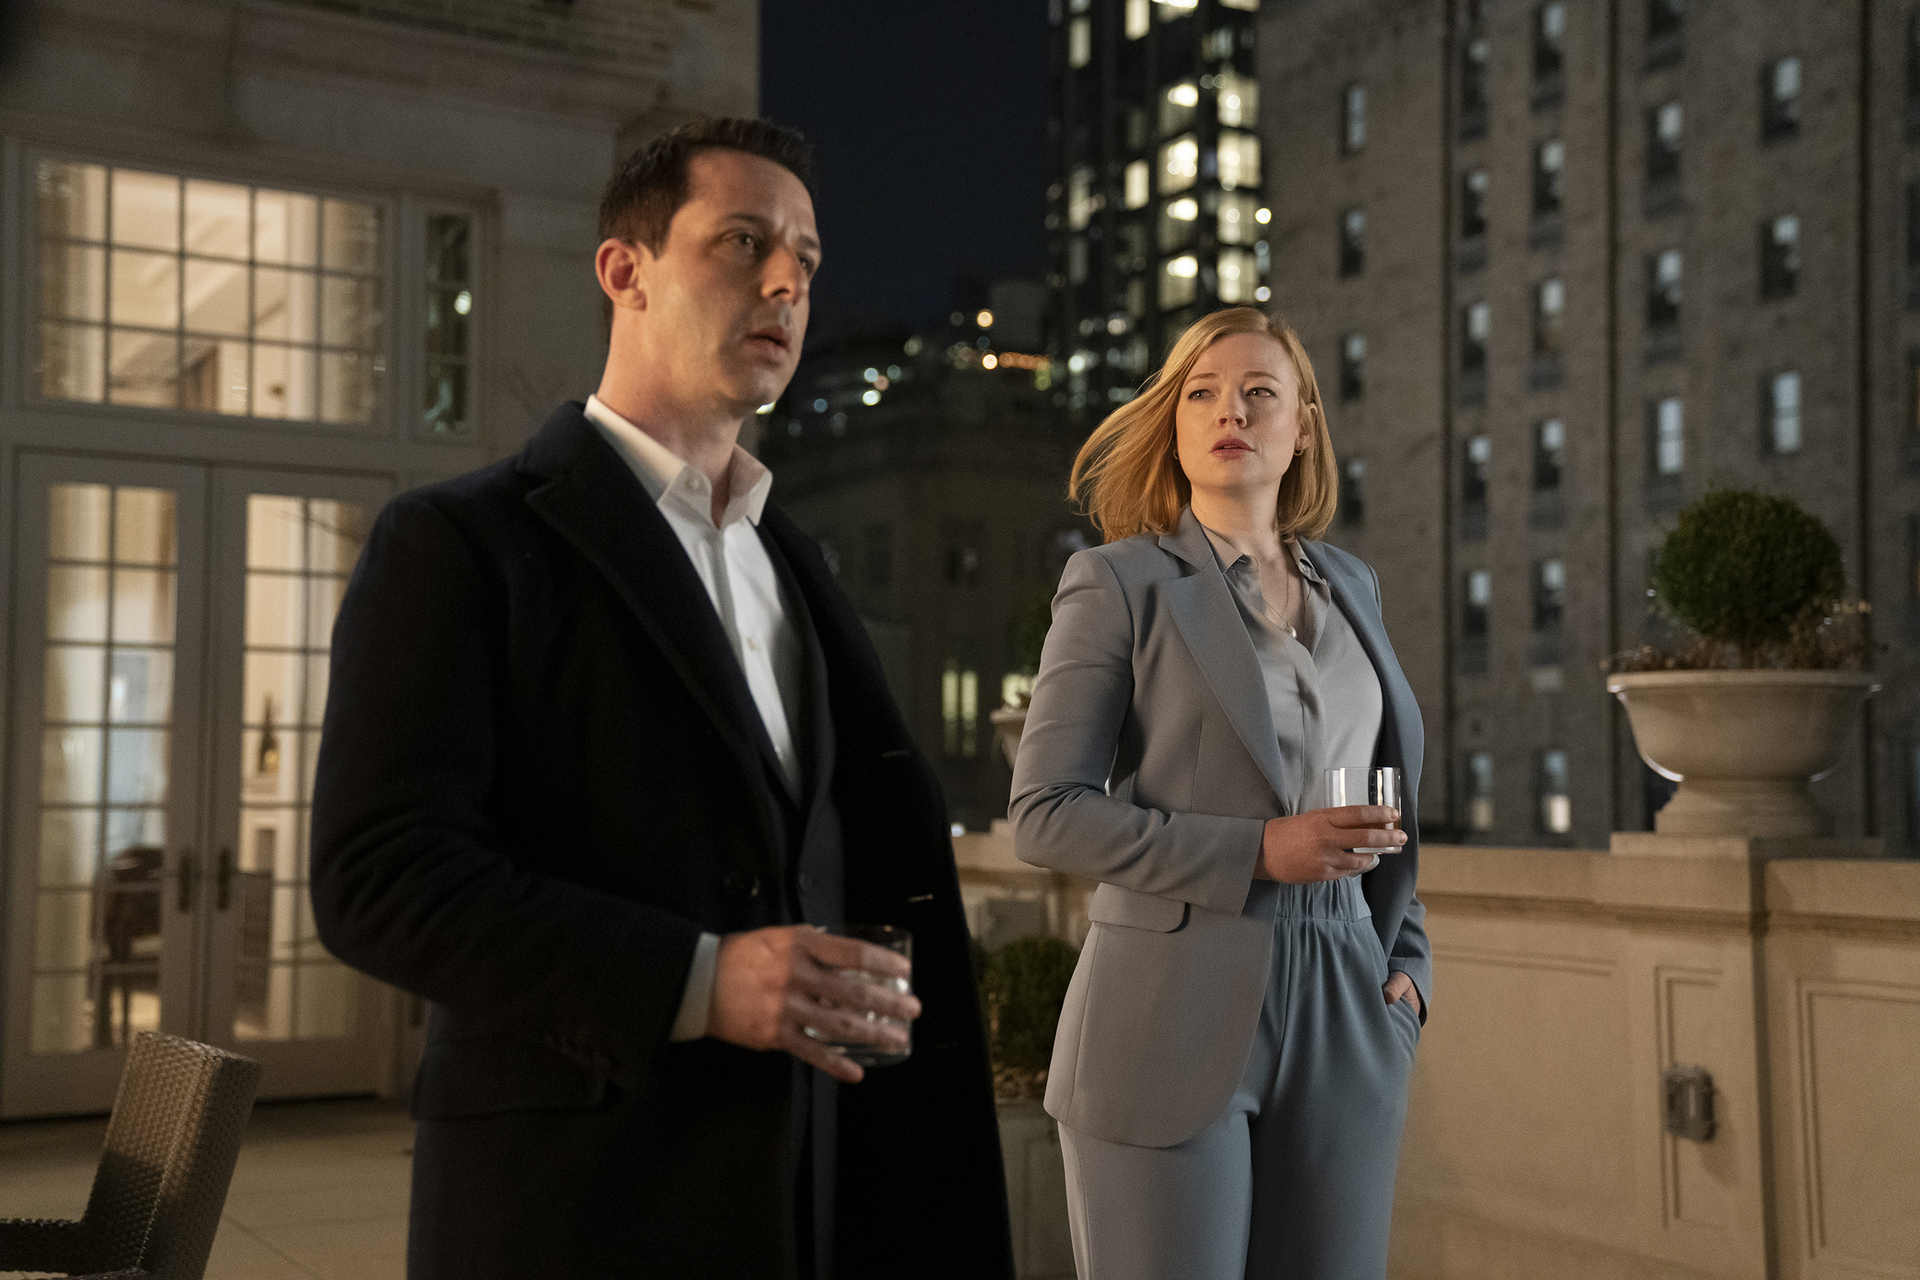 Jeremy Strong and Sarah Snook as Kendall and Shiv Roy in 'Succession' Season 2 Episode 2. They're standing on a balcony and holding drinks.